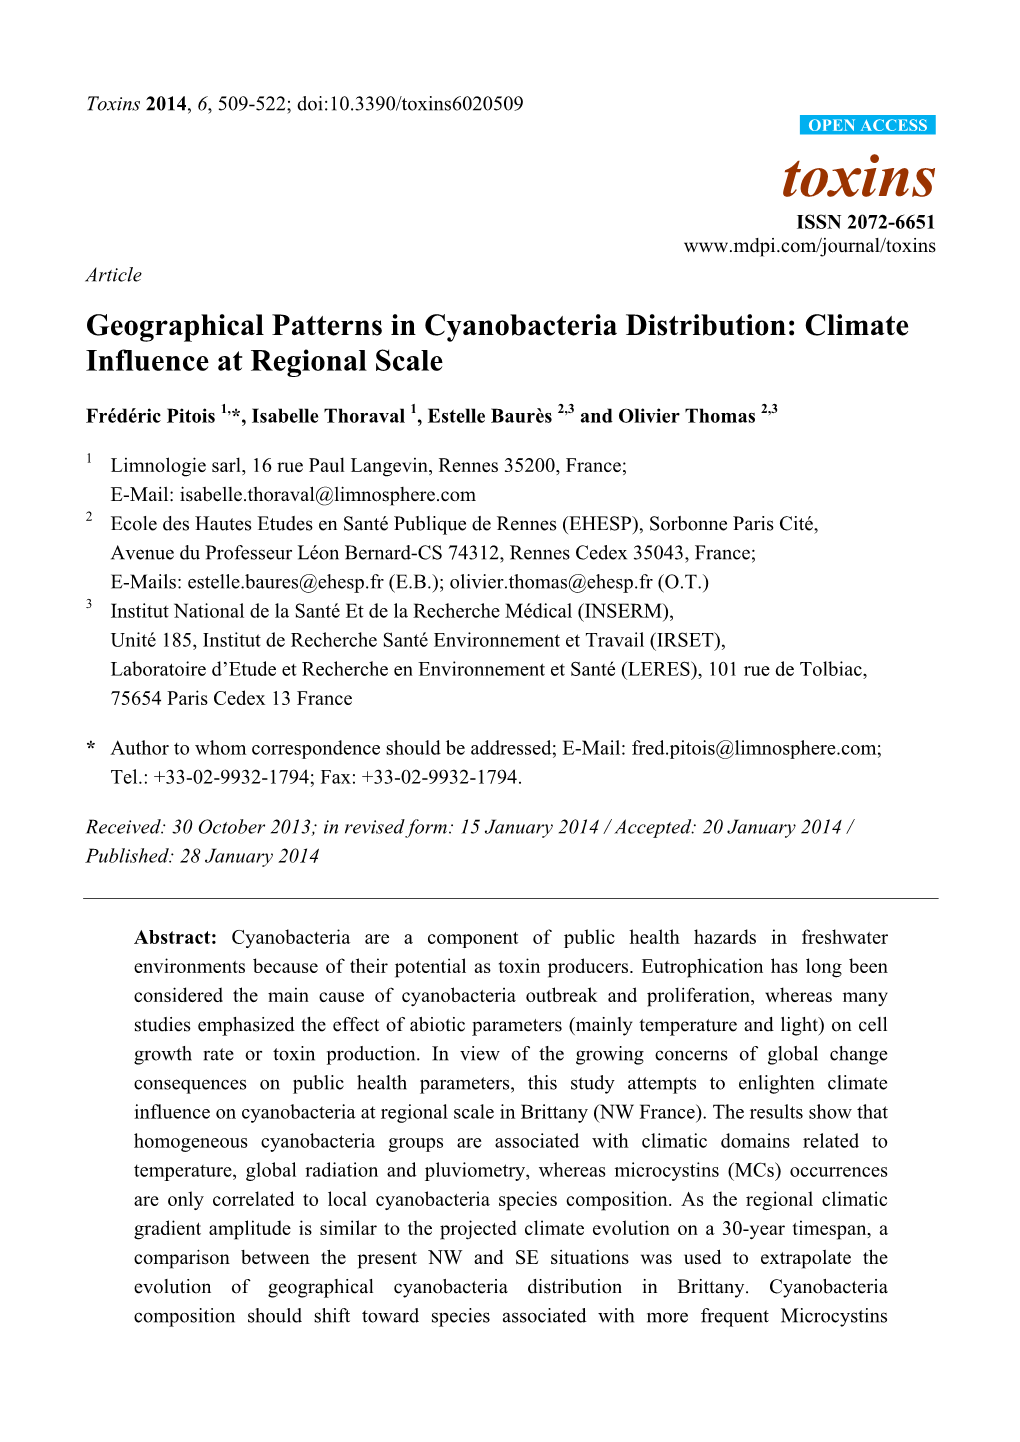 Geographical Patterns in Cyanobacteria Distribution: Climate Influence at Regional Scale